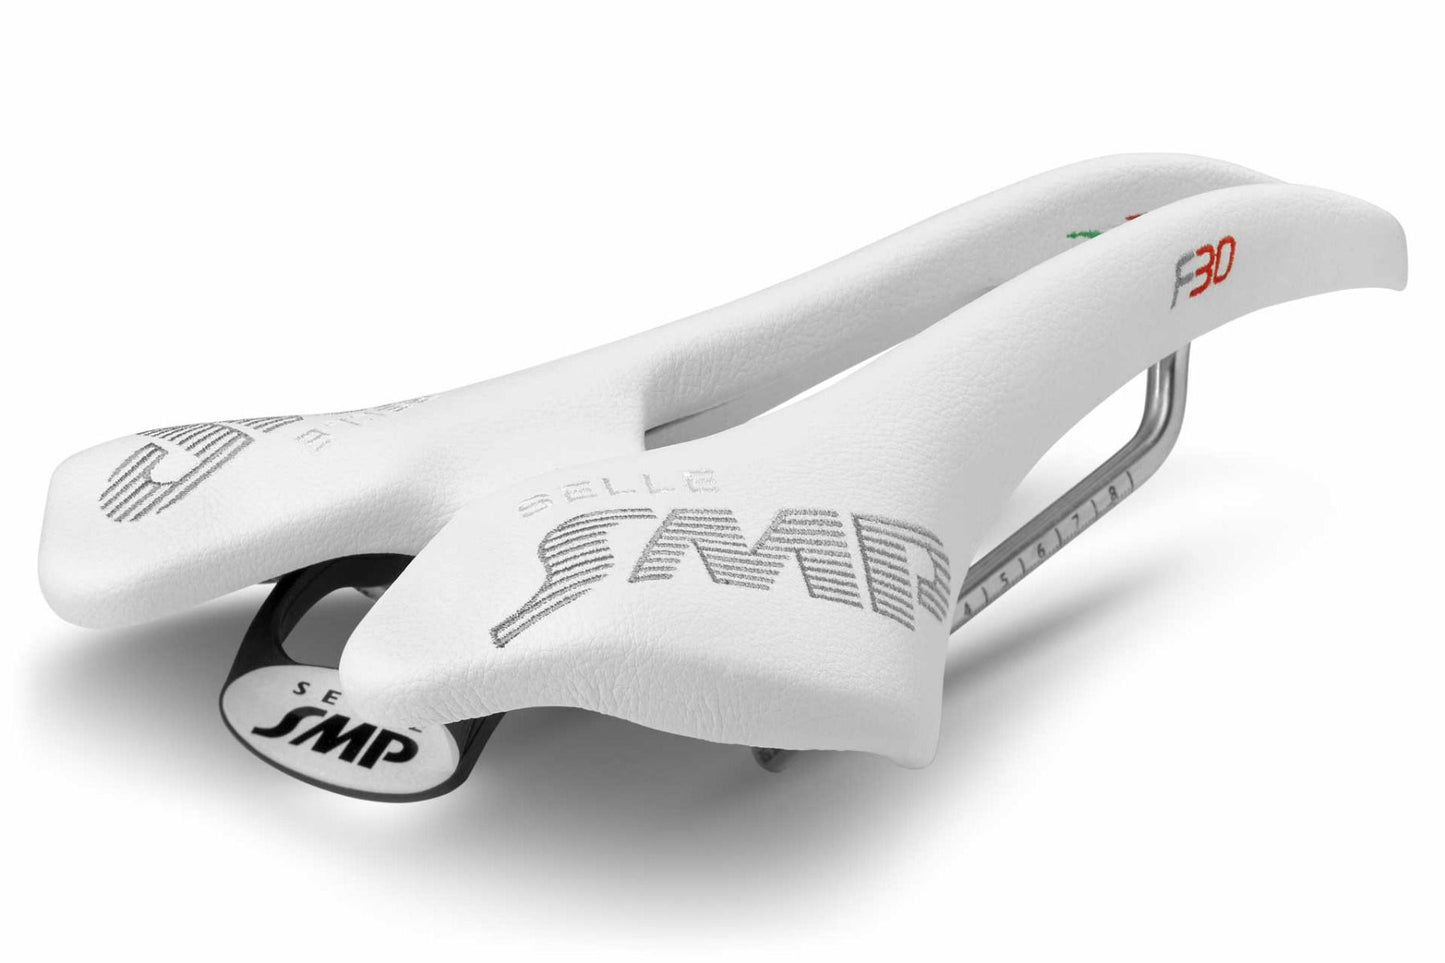 Selle SMP F30 Saddle with Carbon Rails (White)